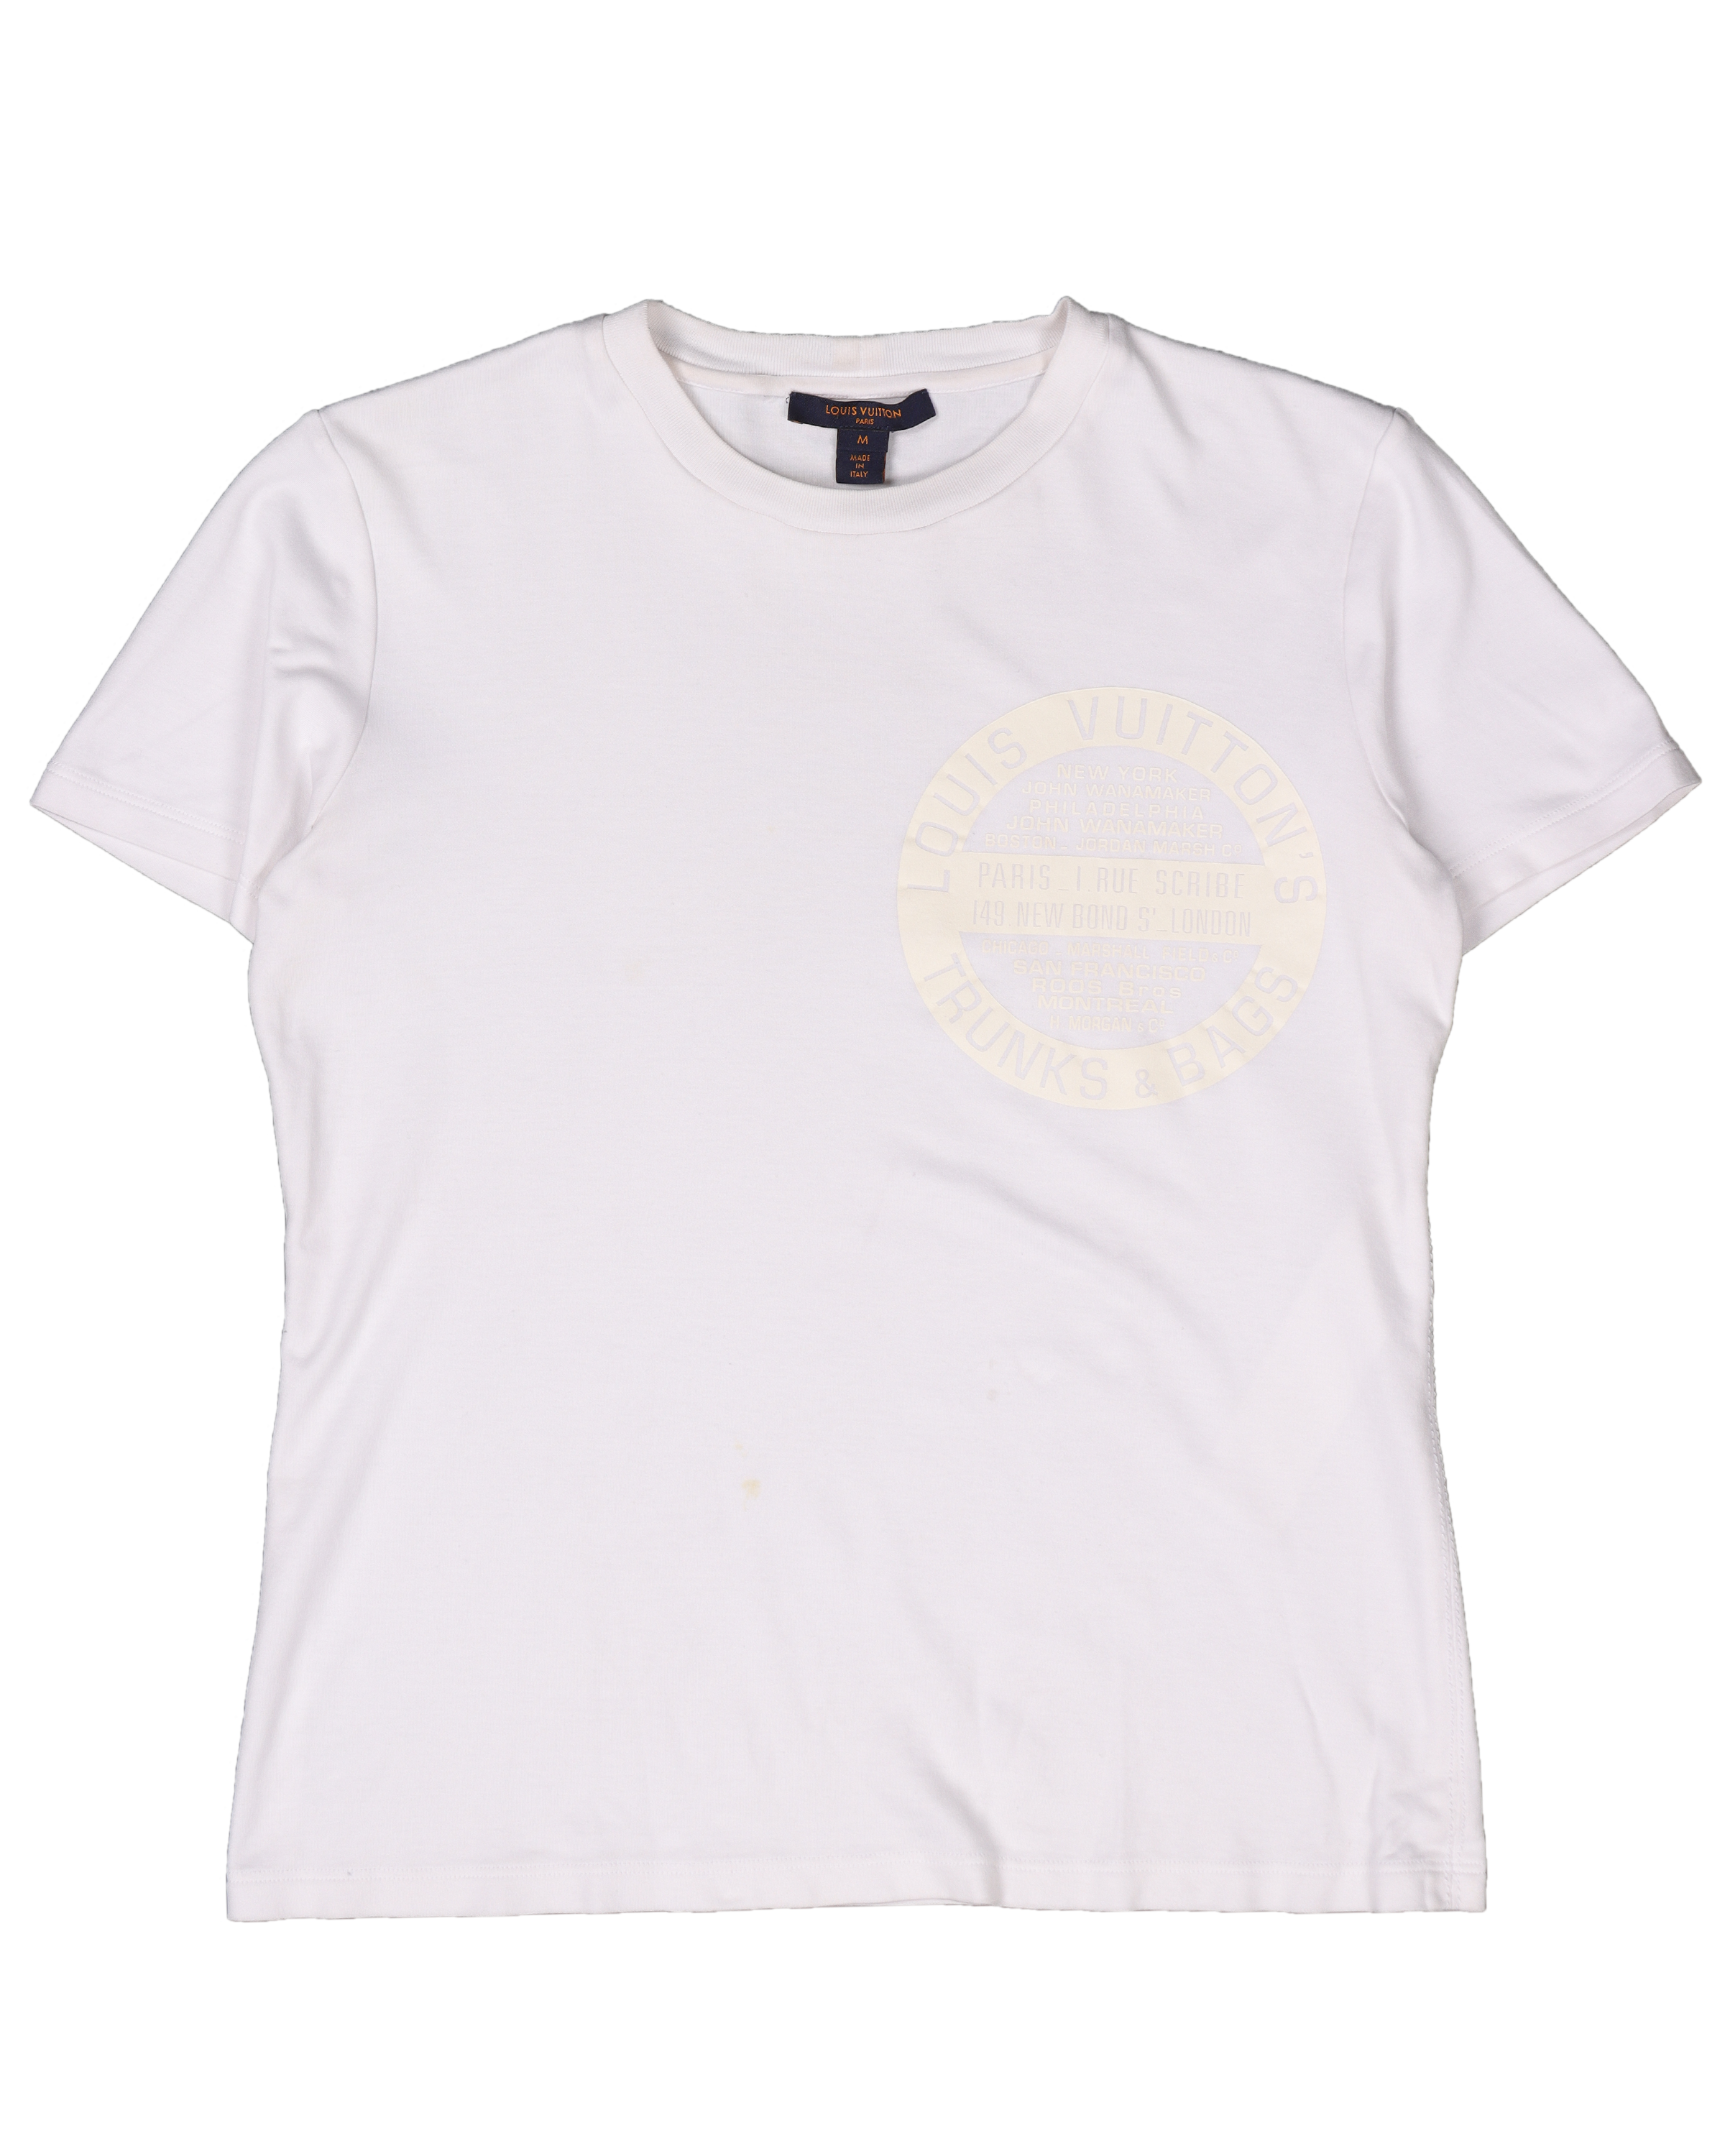 LV Stamp T-Shirt - Ready to Wear